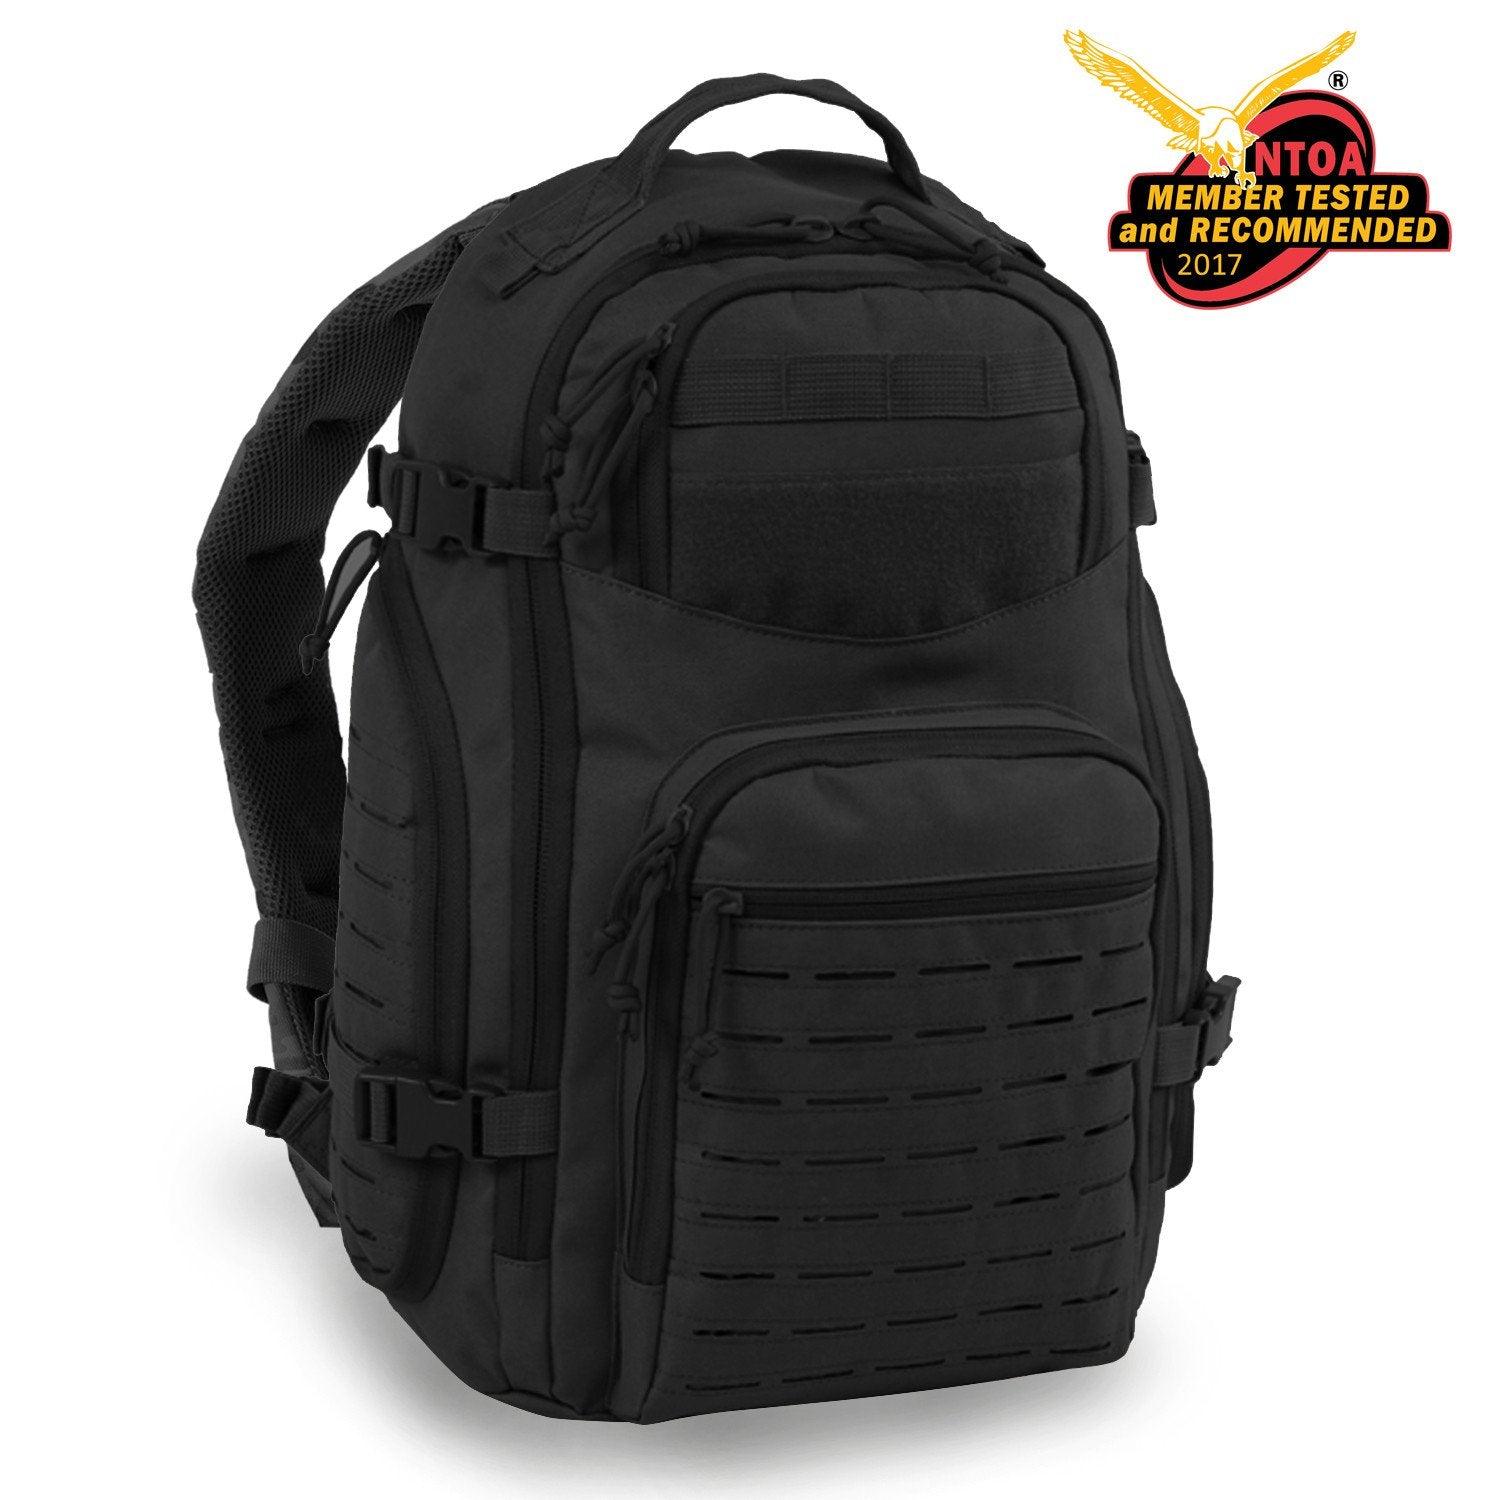 Training Backpack, Black - Add Extra Patches